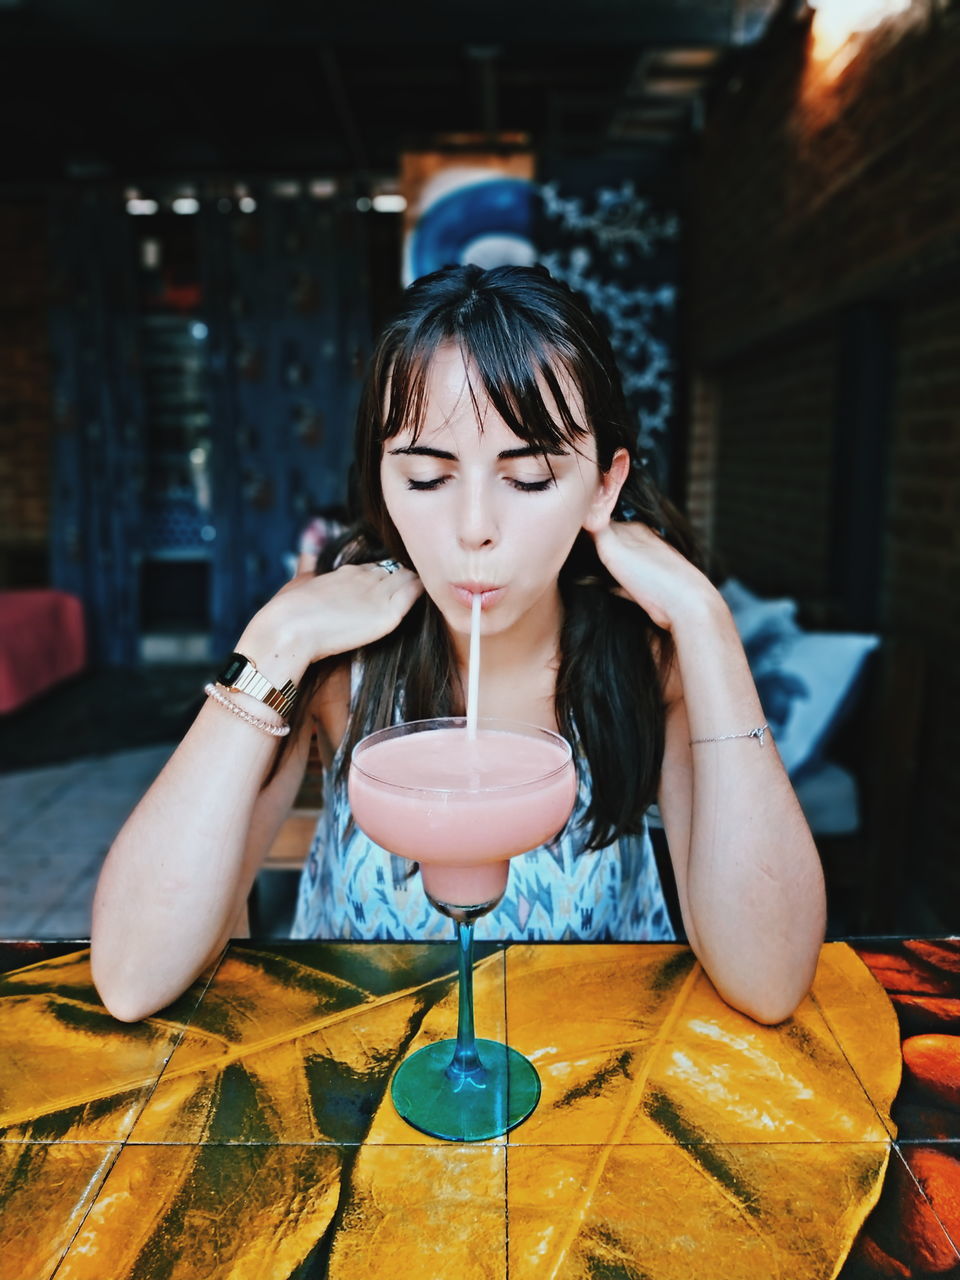 one person, real people, front view, lifestyles, indoors, sitting, hairstyle, hair, table, portrait, women, long hair, leisure activity, food and drink, focus on foreground, restaurant, young adult, girls, bangs, contemplation